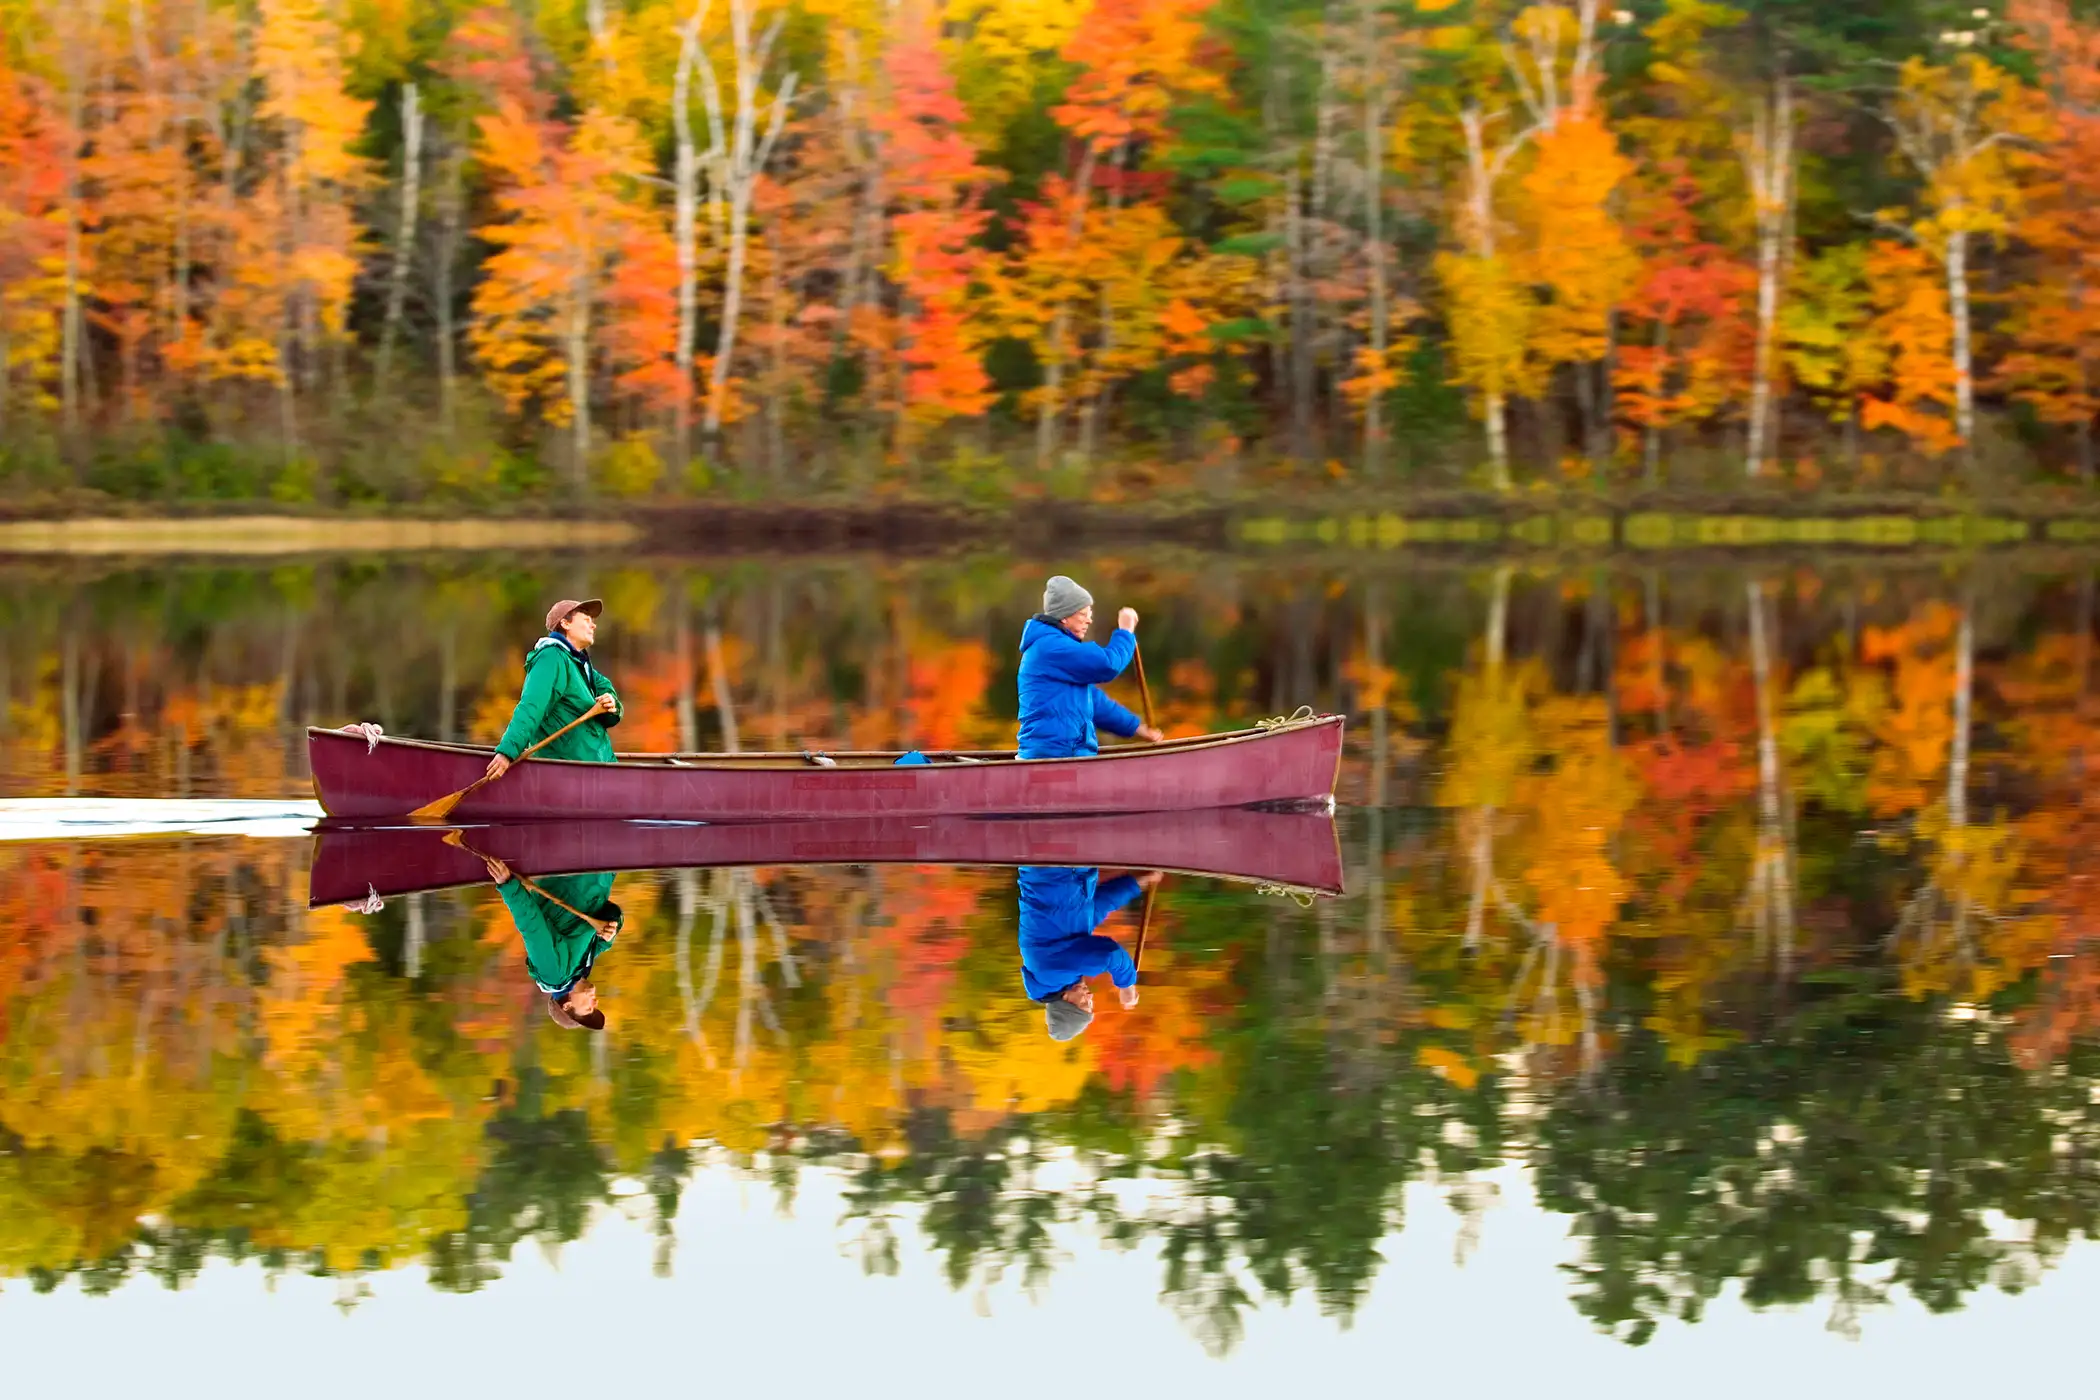 A pair of canoeists paddle